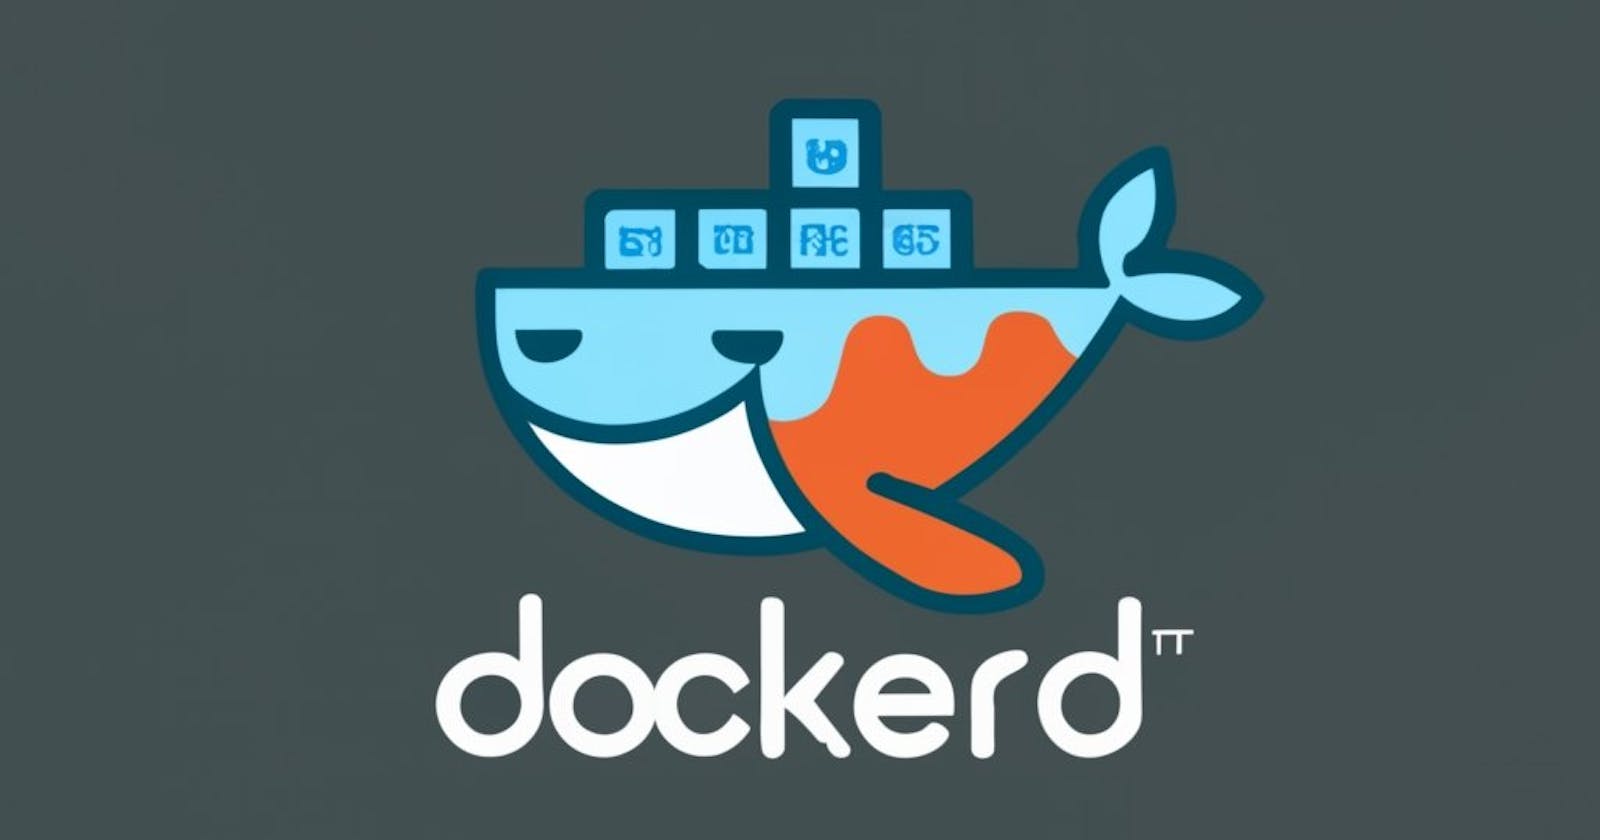 What does a Docker daemon mean?